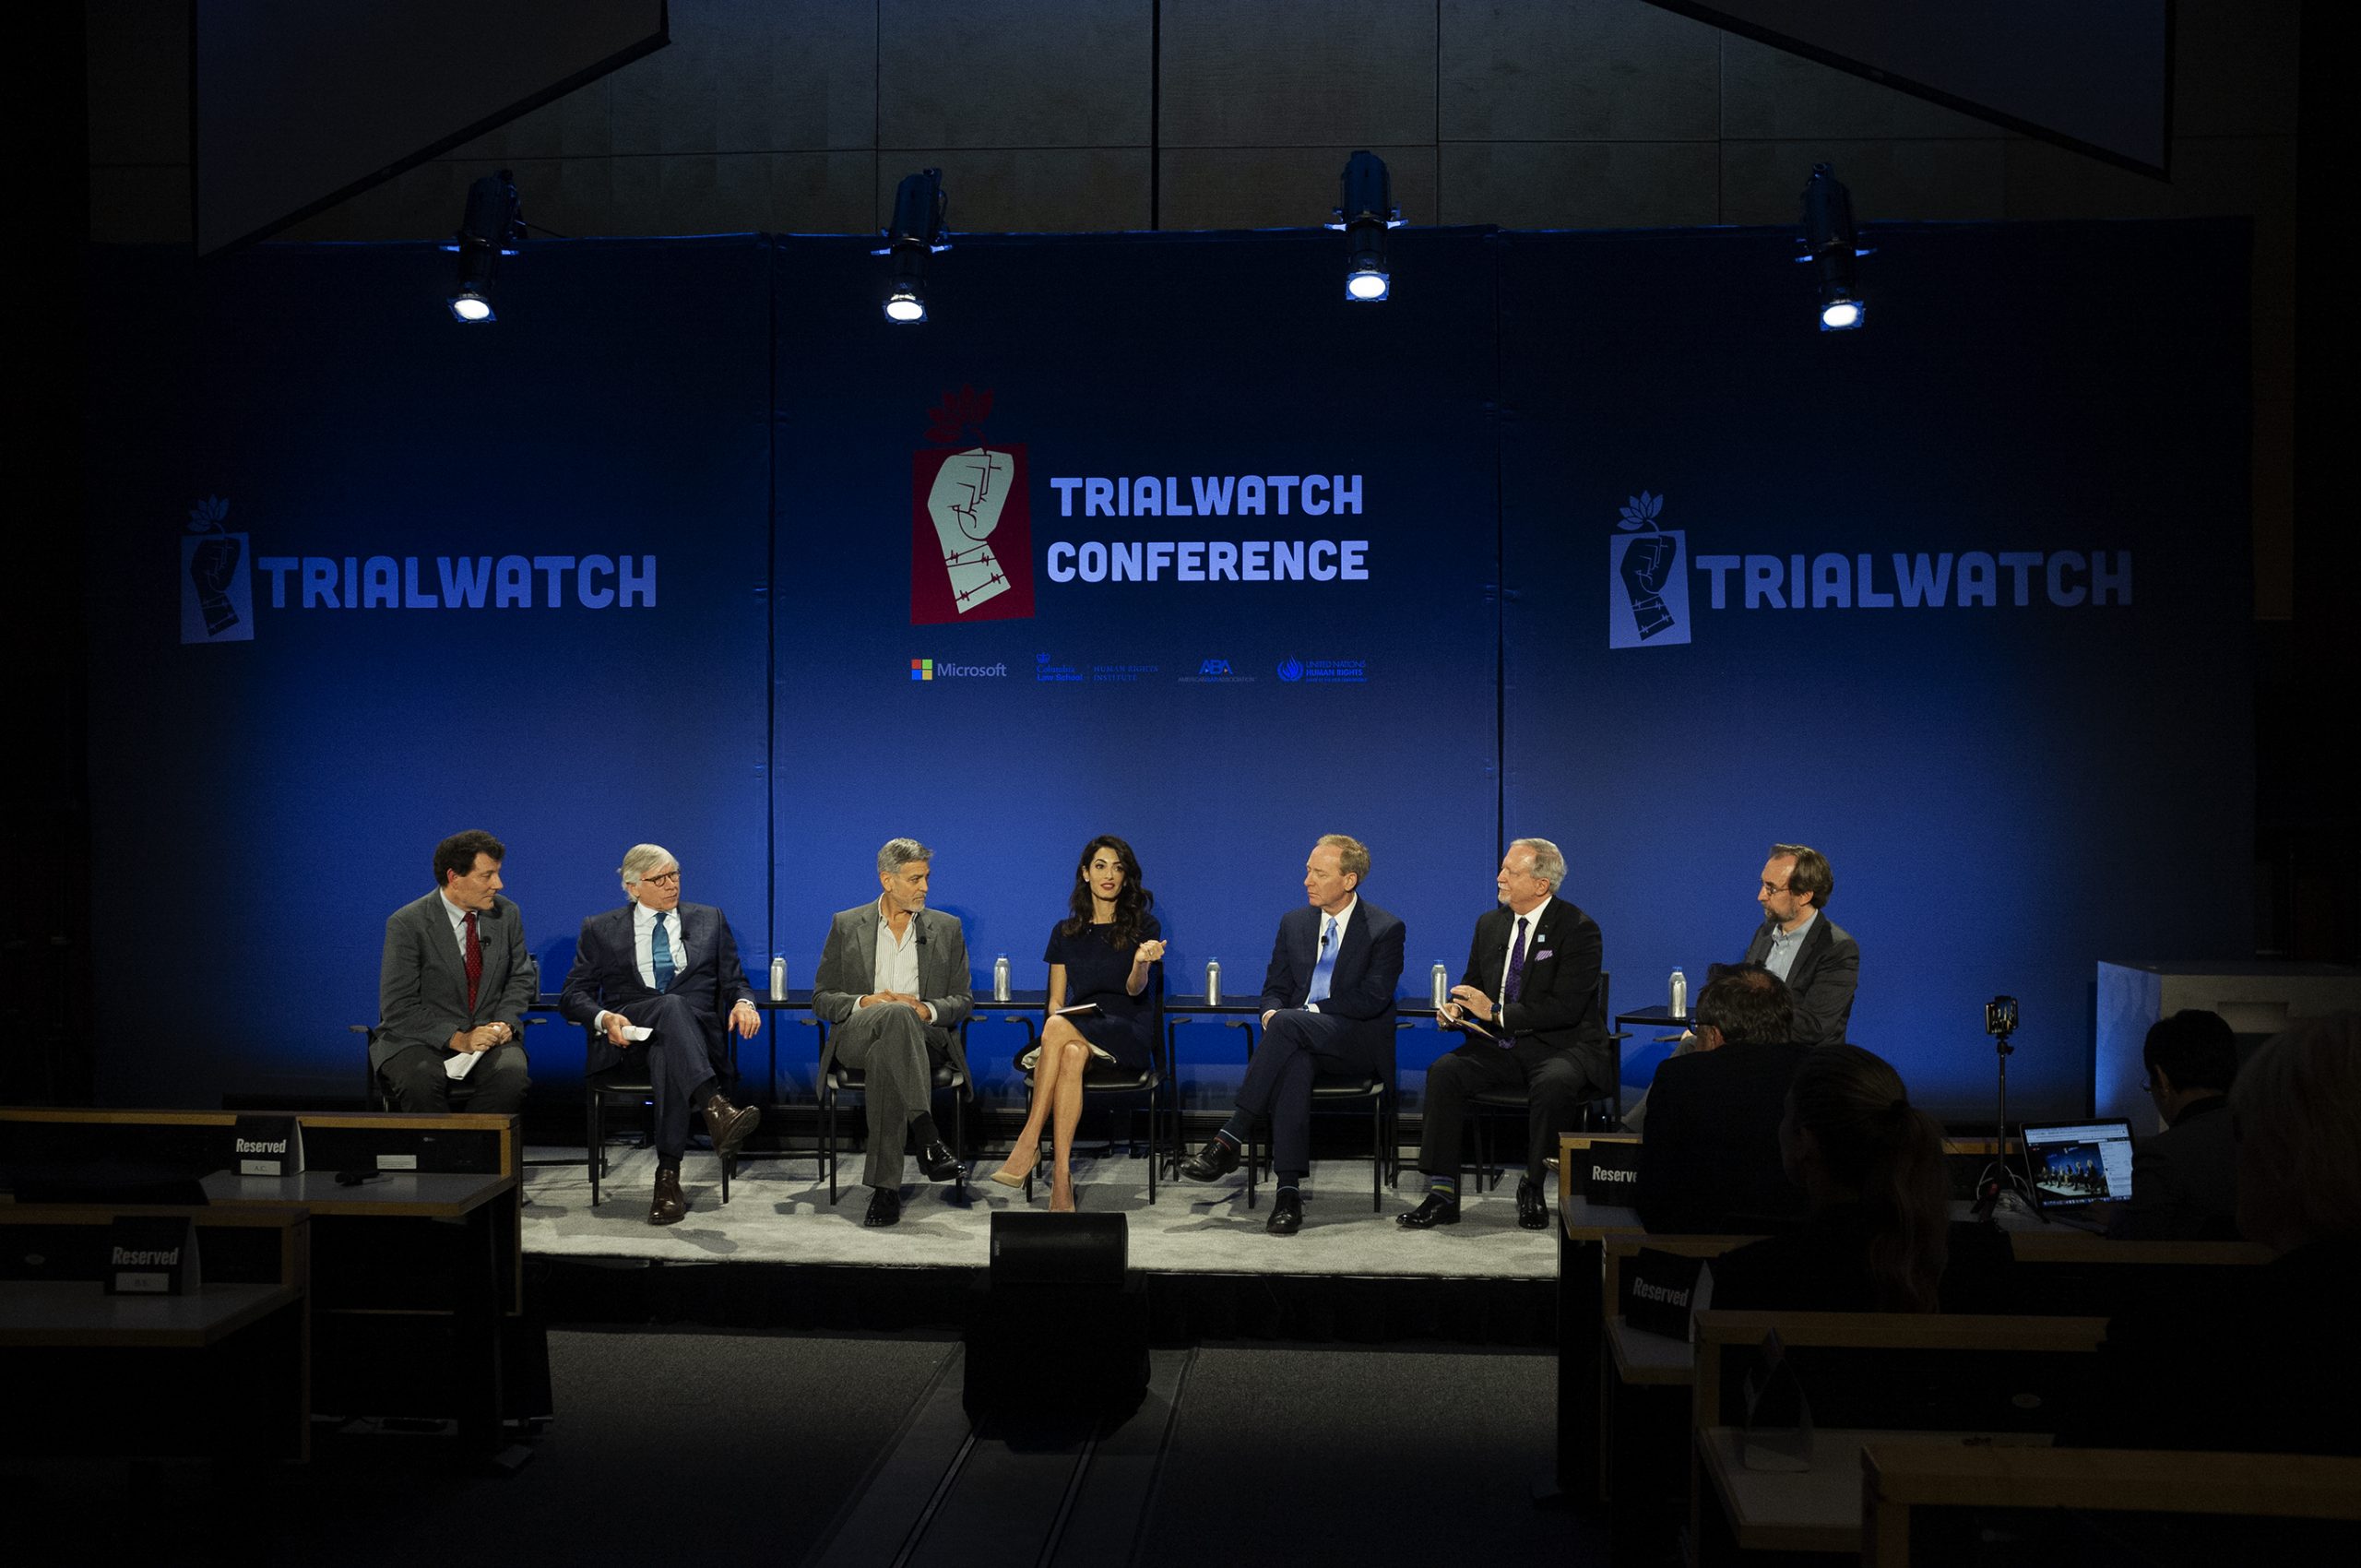 The panel of speakers at the TrialWatch Conference with George and Amal Clooney